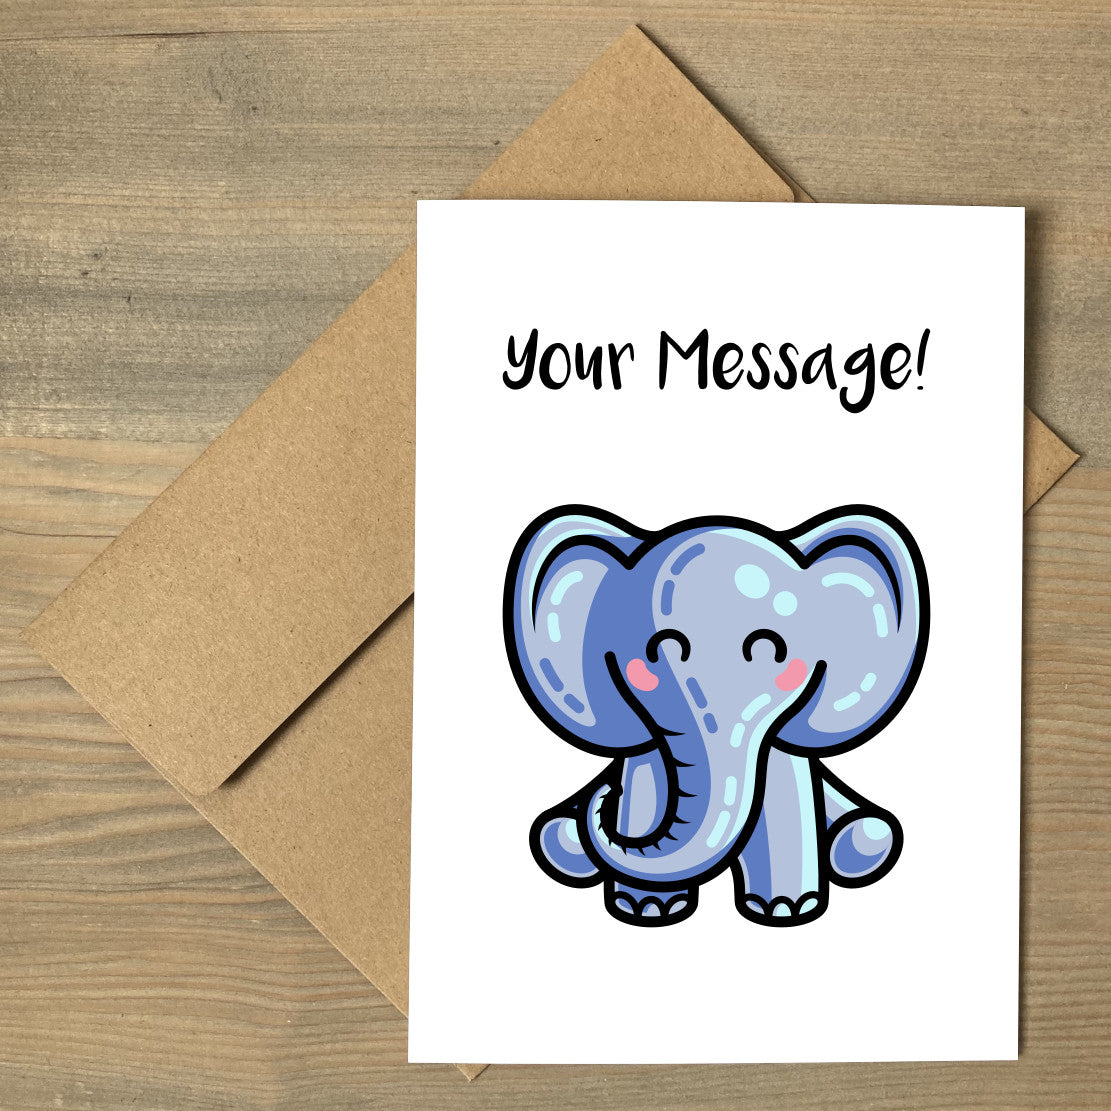 A white greeting card lying flat on a brown envelope featuring a kawaii cute blue elephant design with the personalised words Your Message written above